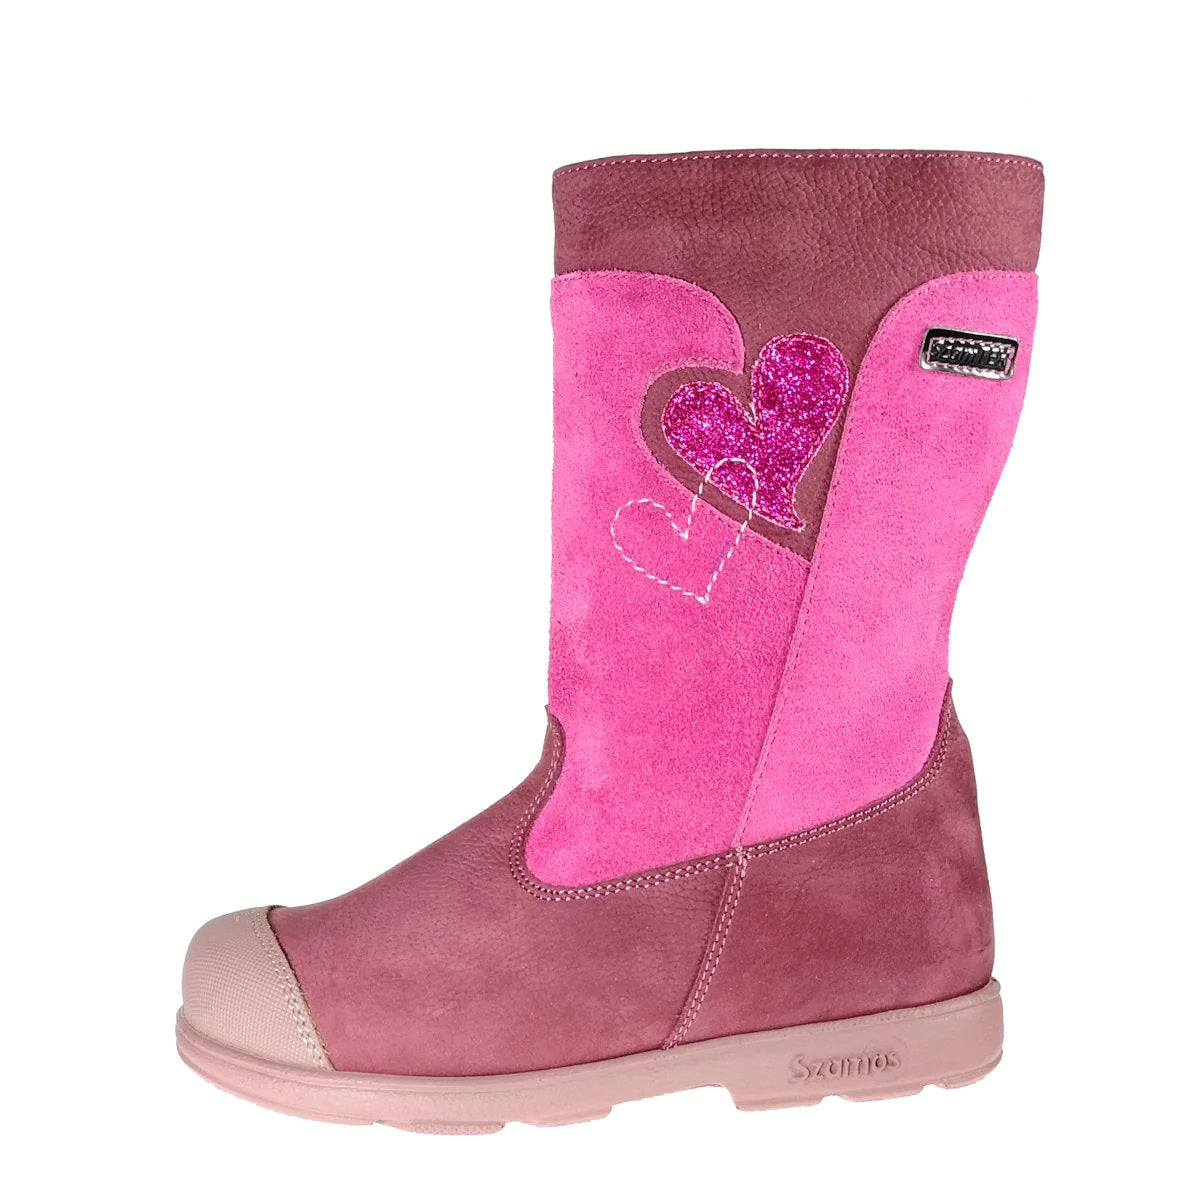 Premium quality supinated boots made from 100% genuine leather lining and upper, pink and mauve with hearts and side zipper with fleece inside. This Szamos Kids product meets the highest expectations of healthy and comfortable kids shoes. The exceptional comfort these shoes provide assure the well-being and happiness of your child.